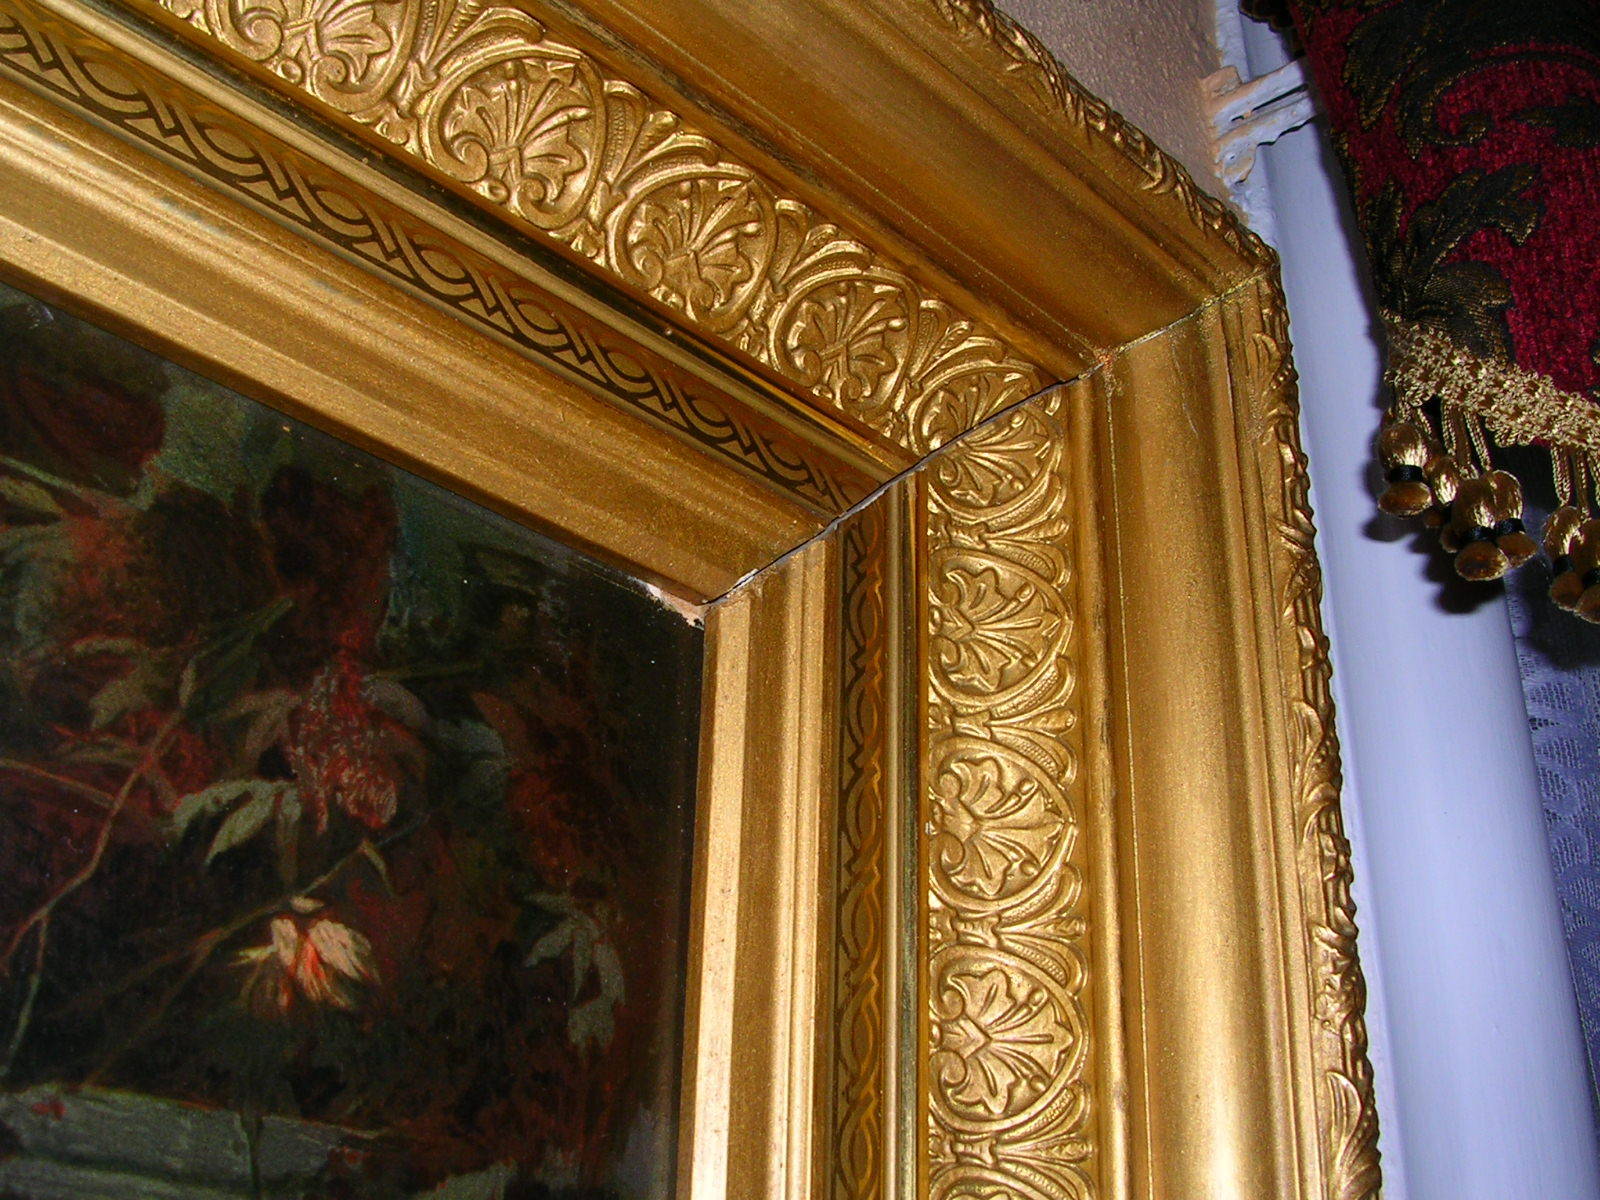 ANTIQUE LARGE GOLD GILDED FRAME. AND ART BY KAULBACH AUGUST FRIEDRICH 1850-1920